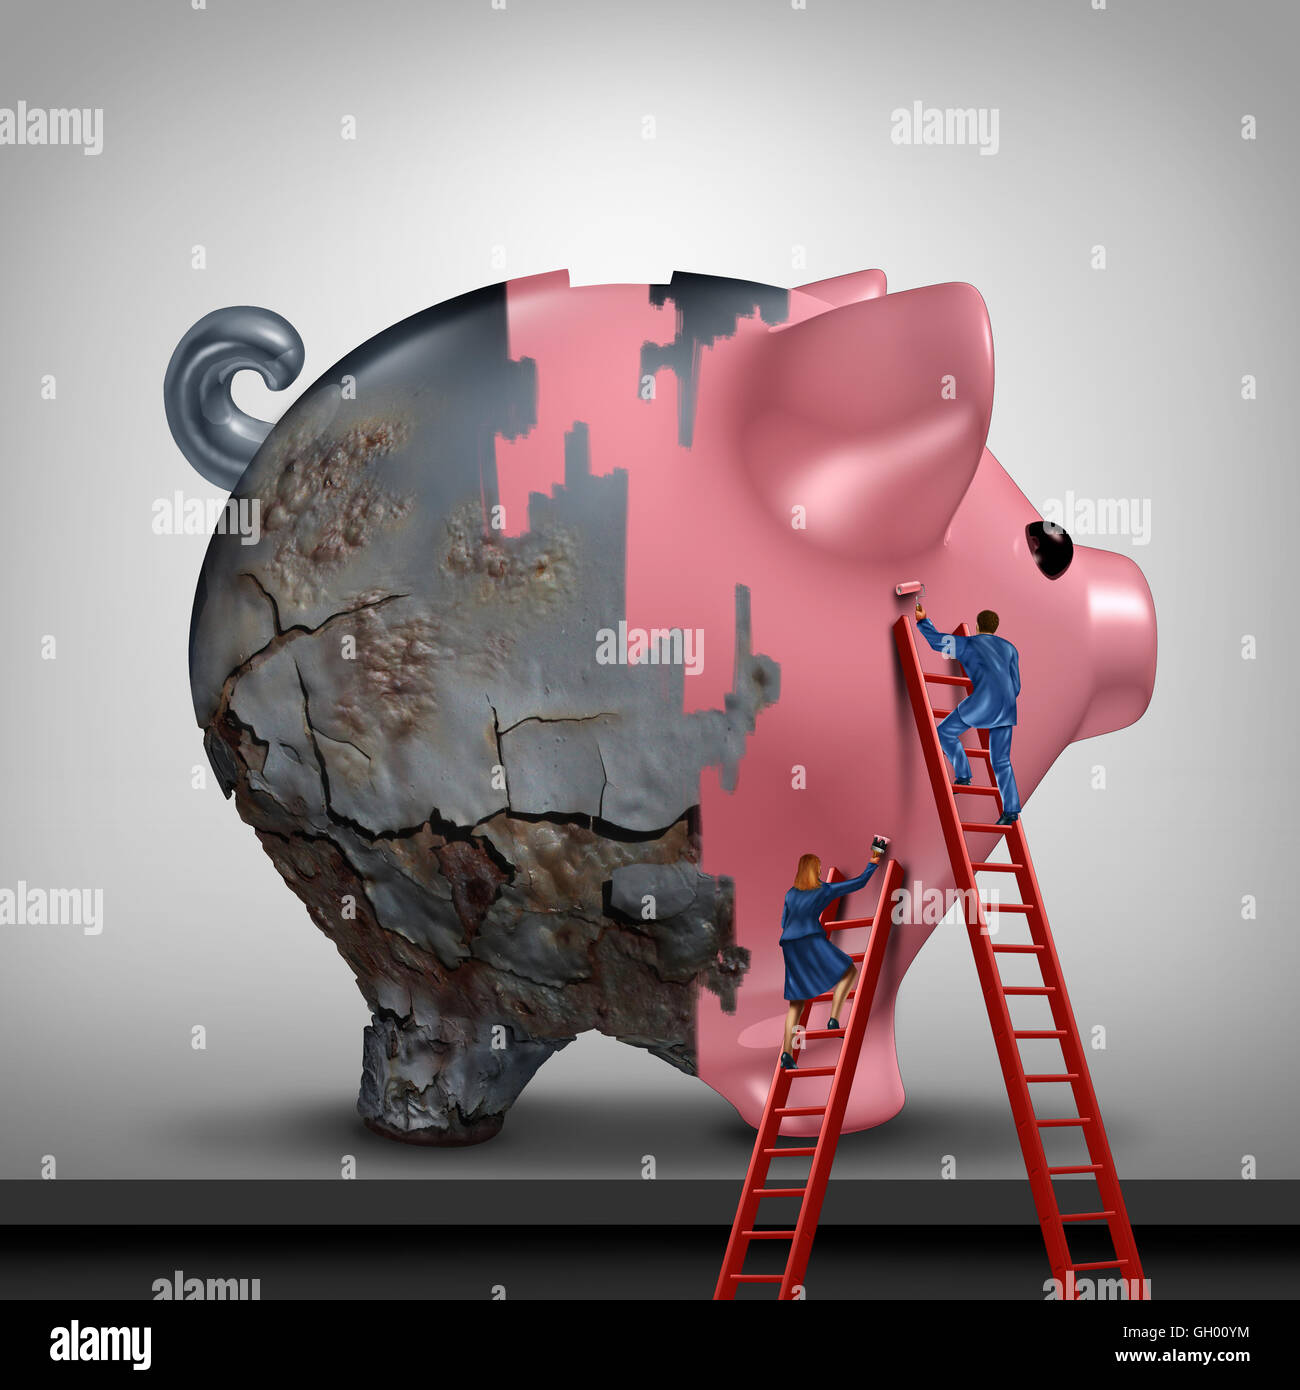 Financial credit recovery busness concept as a woman and man as bank or banking advisors repairing an old rusted piggy bank with a fresh coat of paint as a savings improvement metaphor with 3D illustration elements. Stock Photo